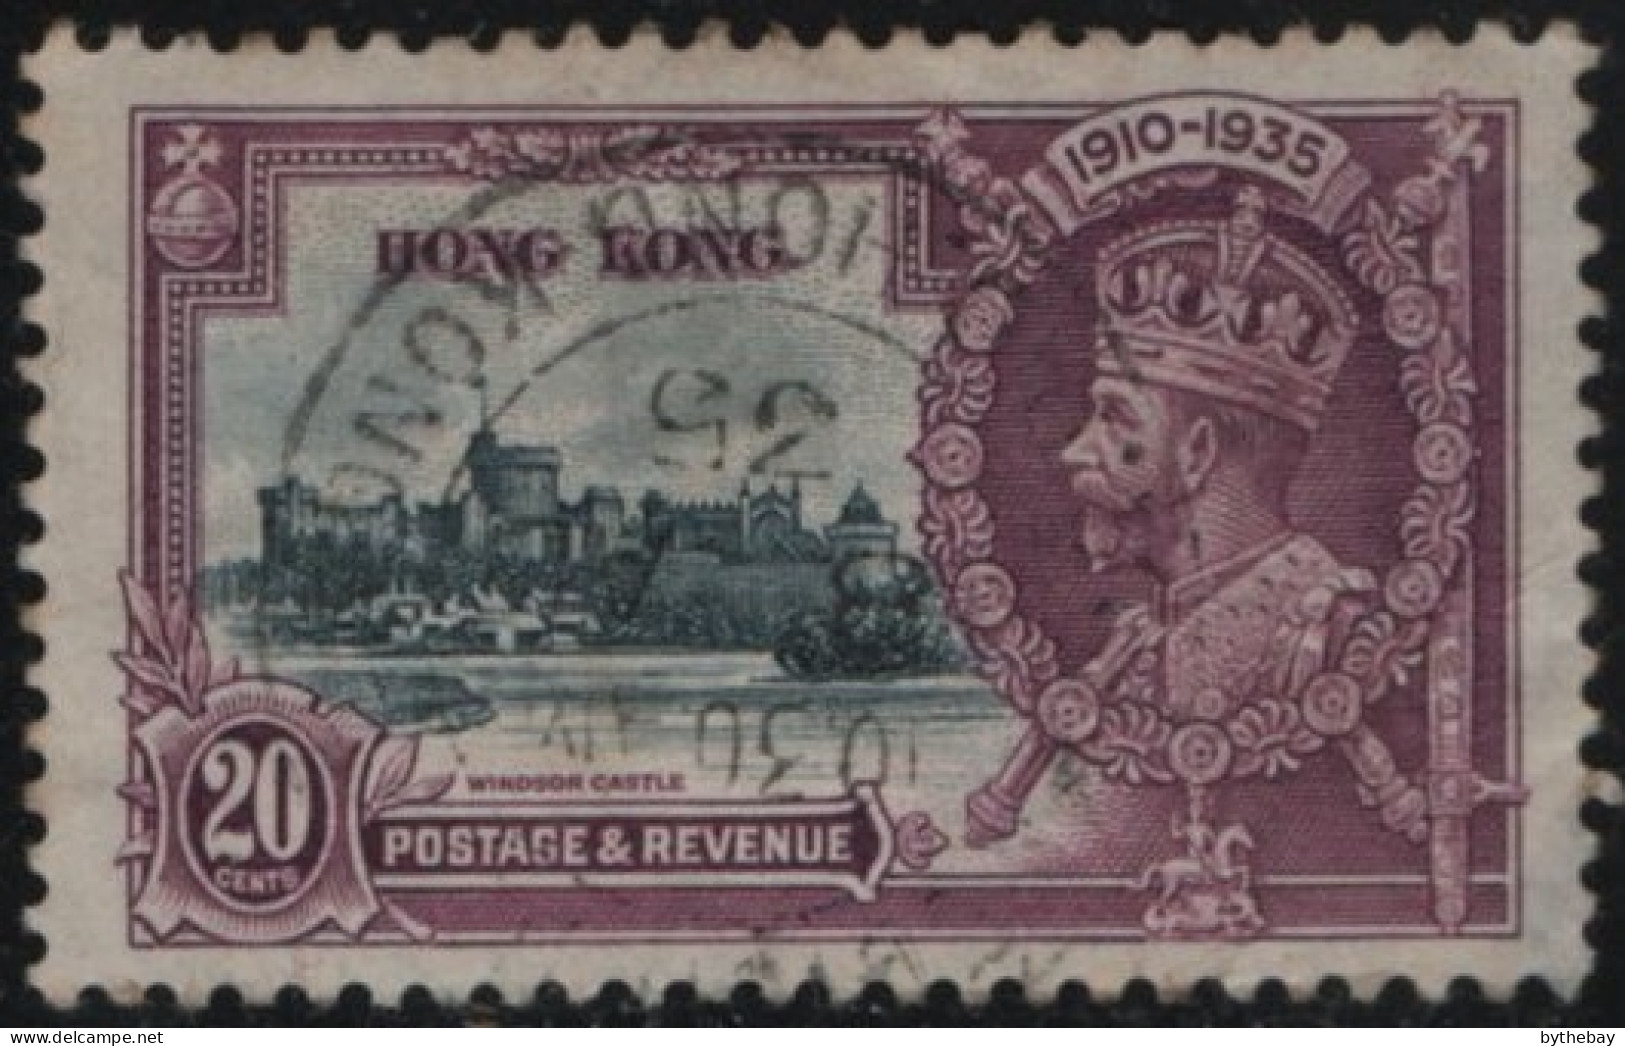 Hong Kong 1935 Used Sc 150 20c GV Silver Jubilee Hinge Remnant - Used Stamps